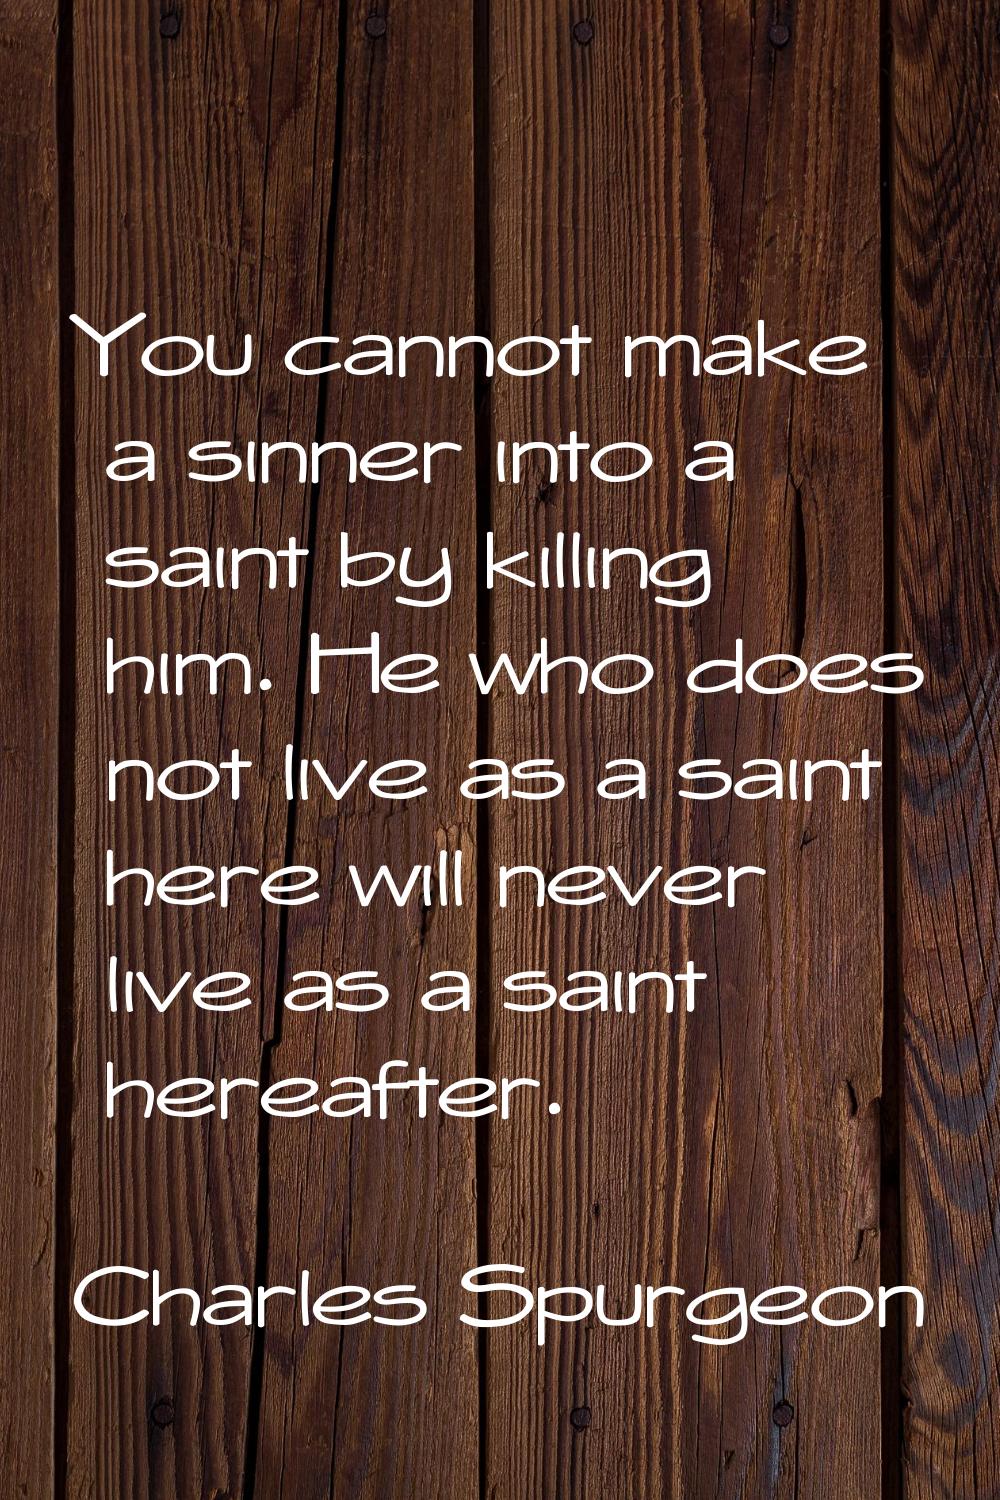 You cannot make a sinner into a saint by killing him. He who does not live as a saint here will nev